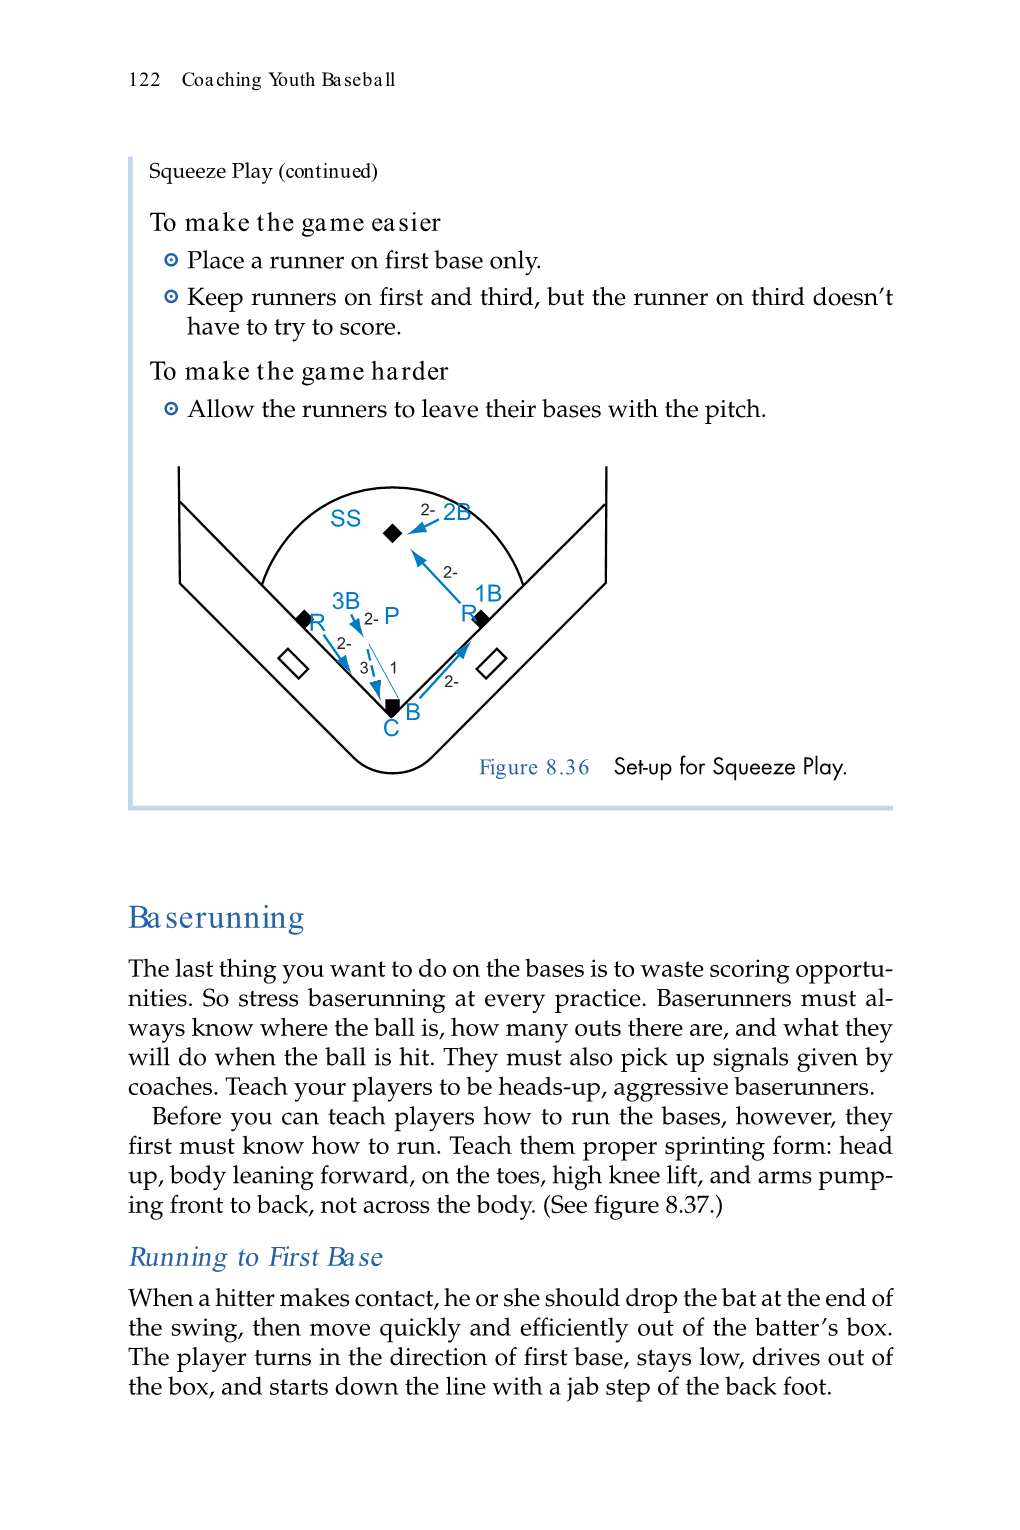 Baserunning the Last Thing You Want to Do on the Bases Is to Waste Scoring Opportu- Nities